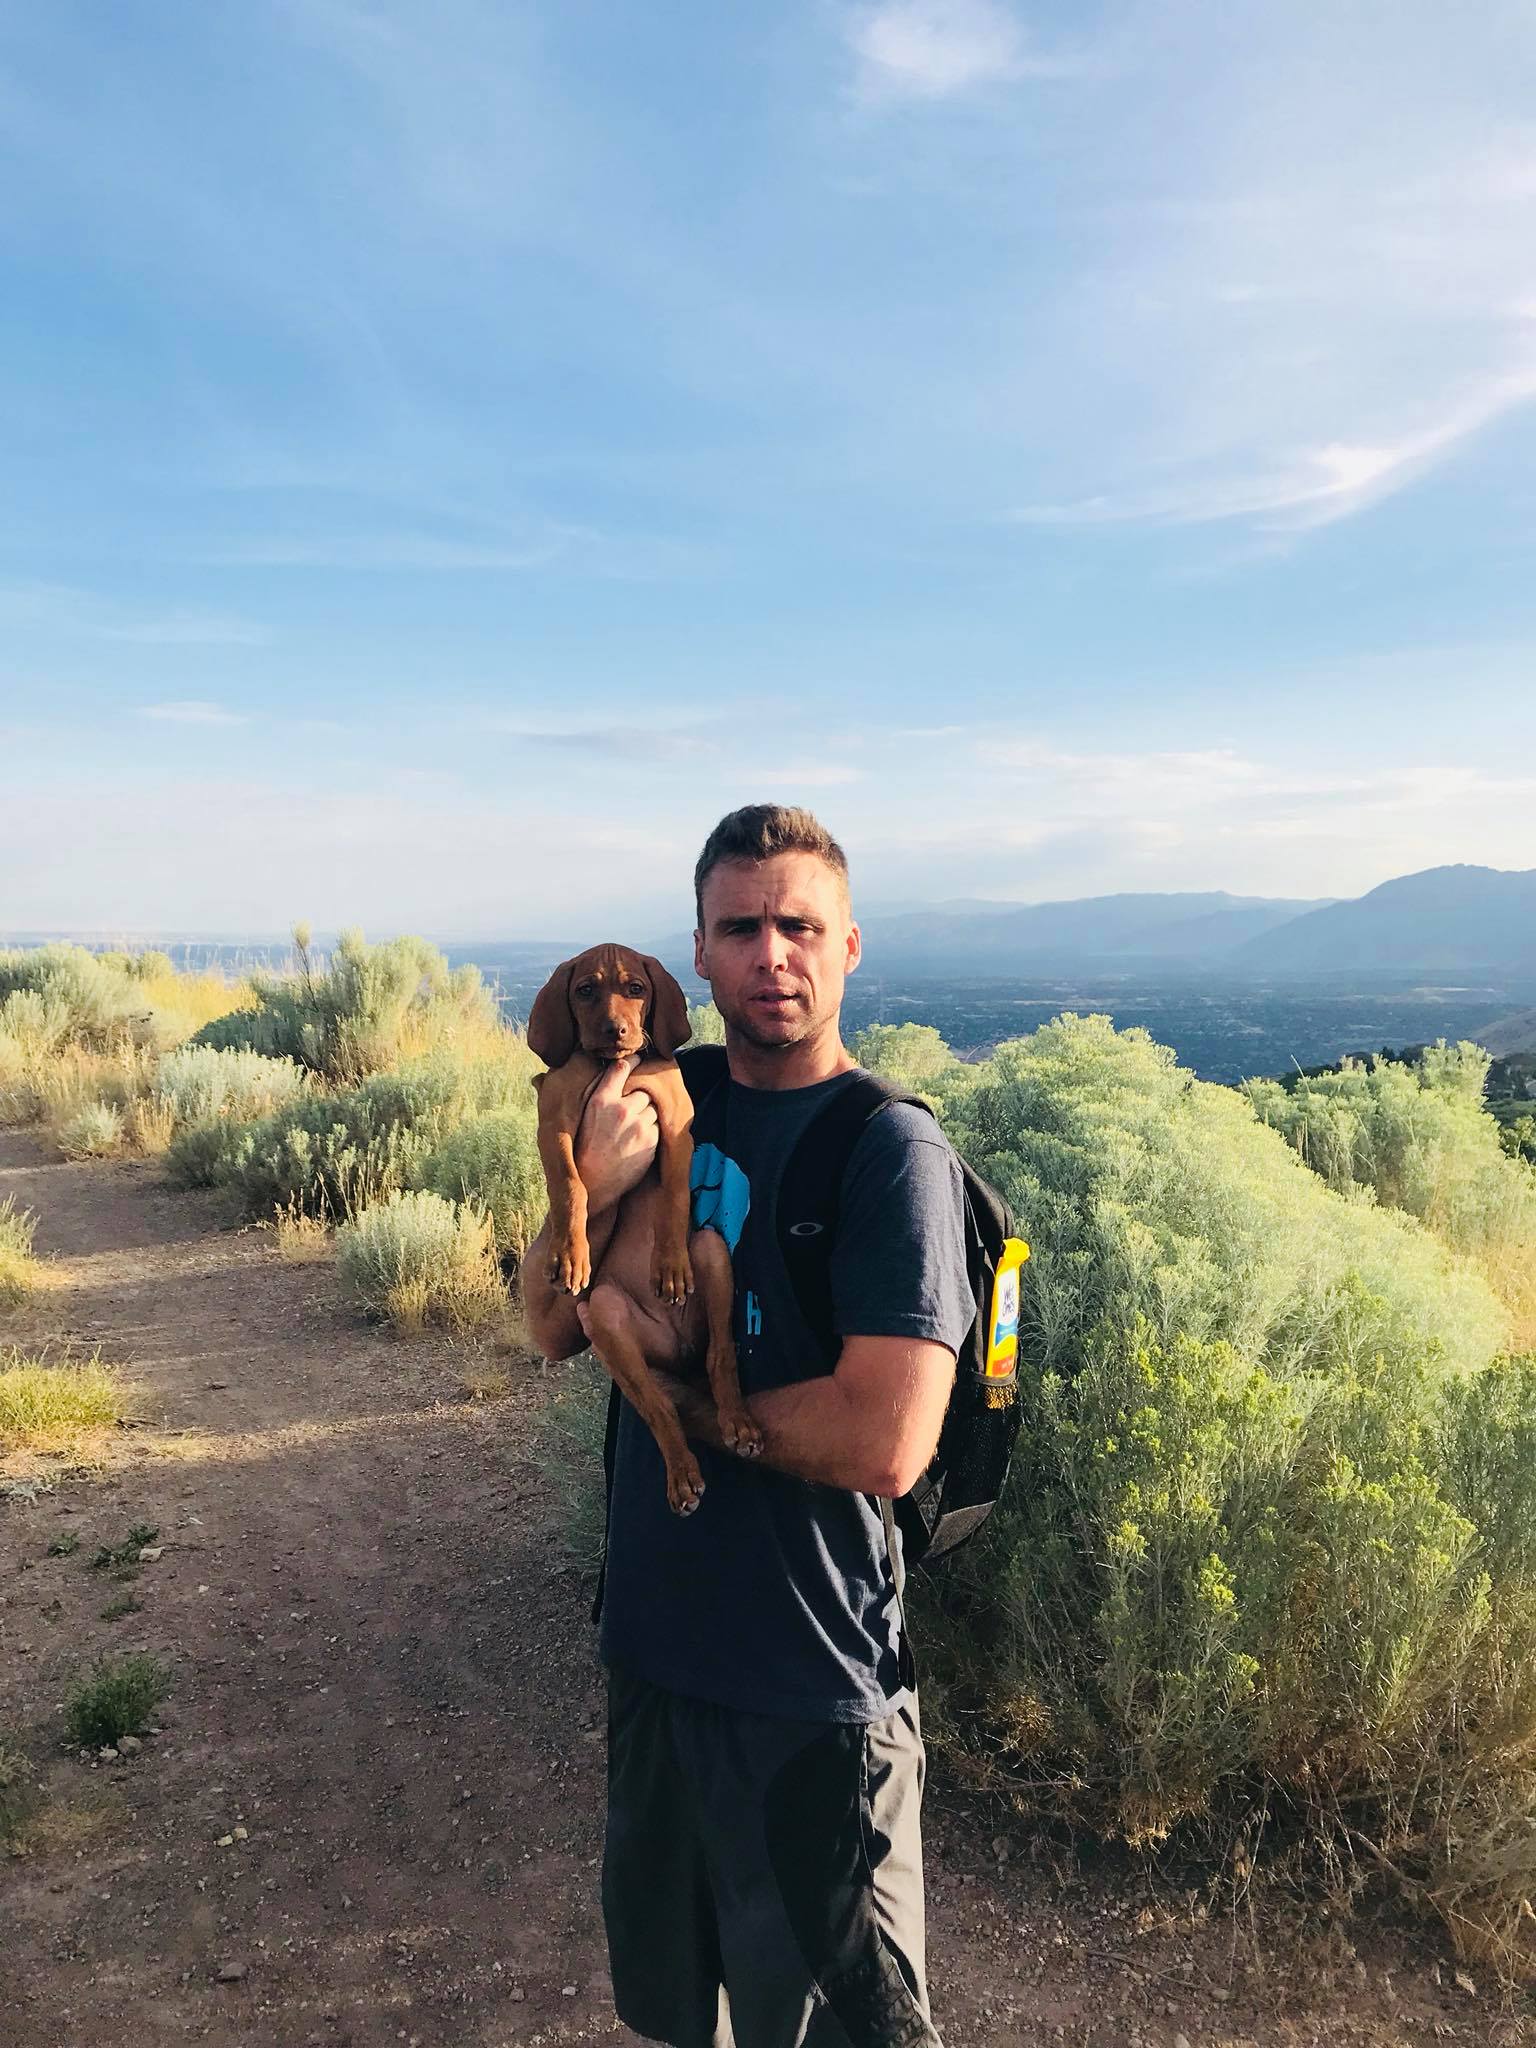 A man wearing a backpack holding a brown vizsla puppy on a trail with mountains in background.